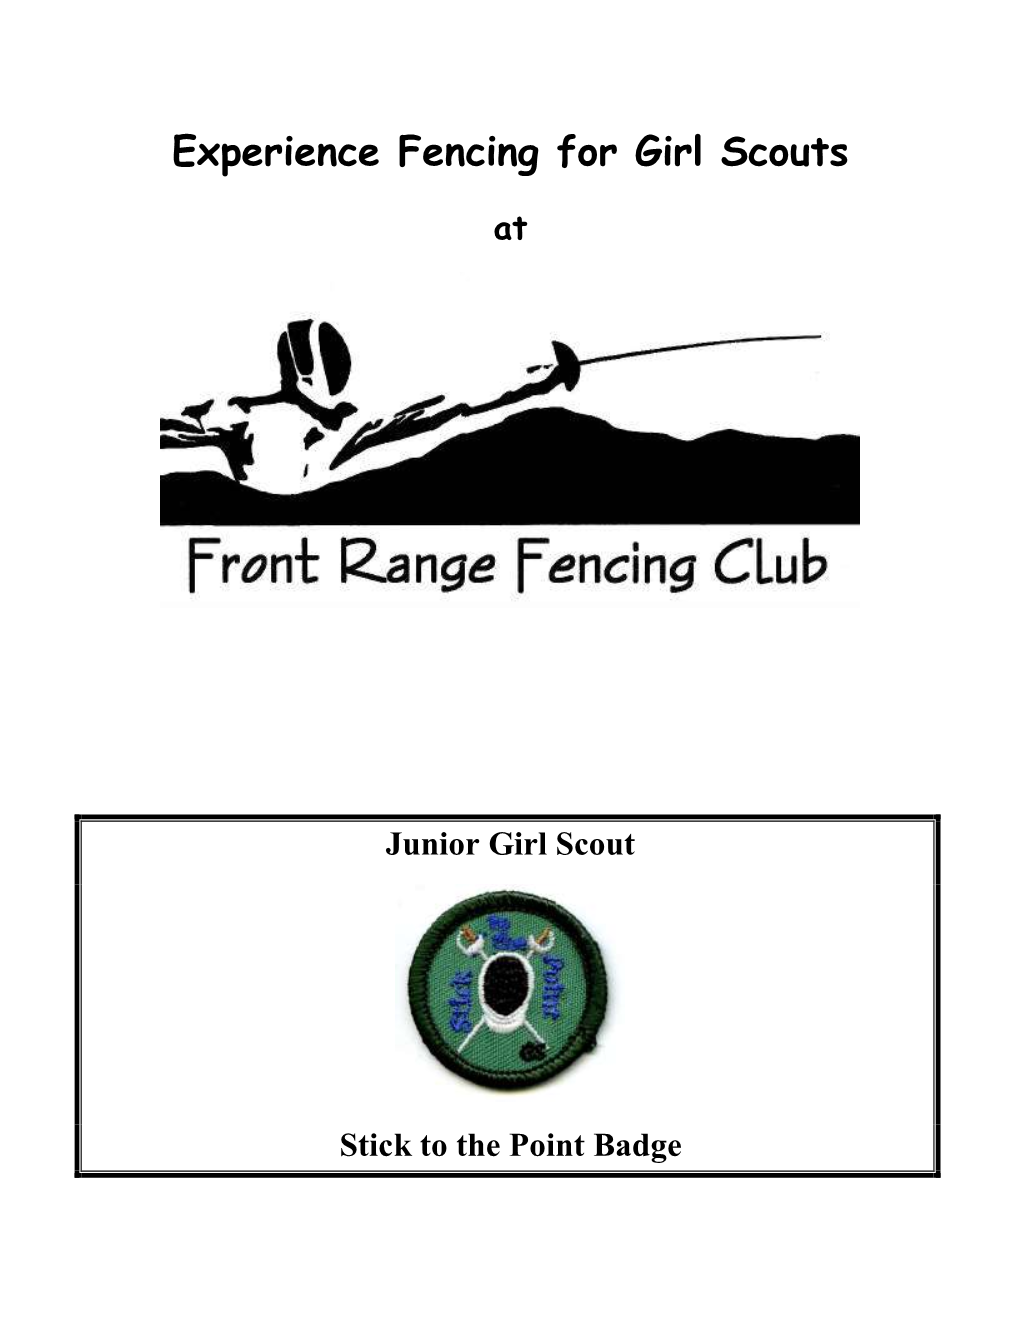 Experience Fencing for Girl Scouts: Stick to the Point Badge